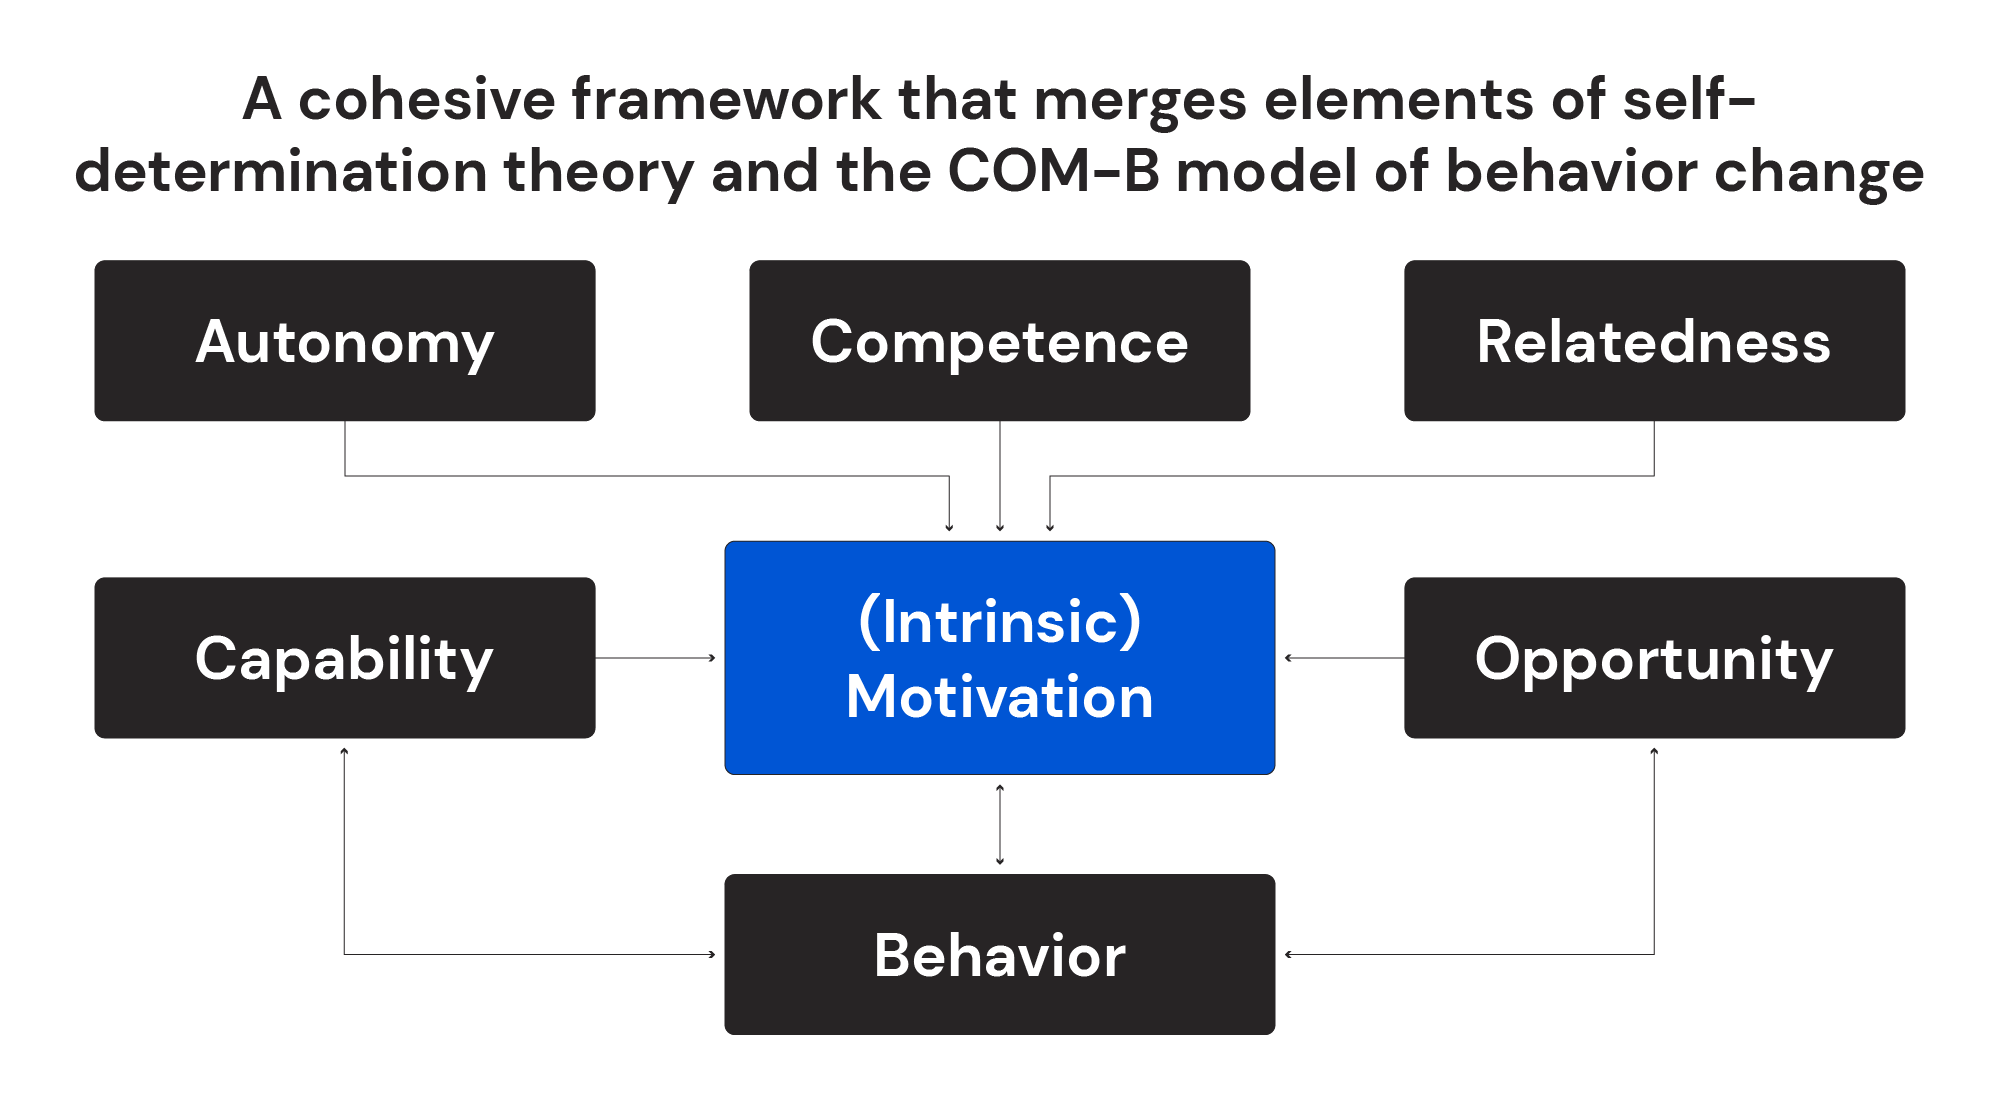 A cohesive framework that merges elements of self-determination theory and the COM-B model of behavior change